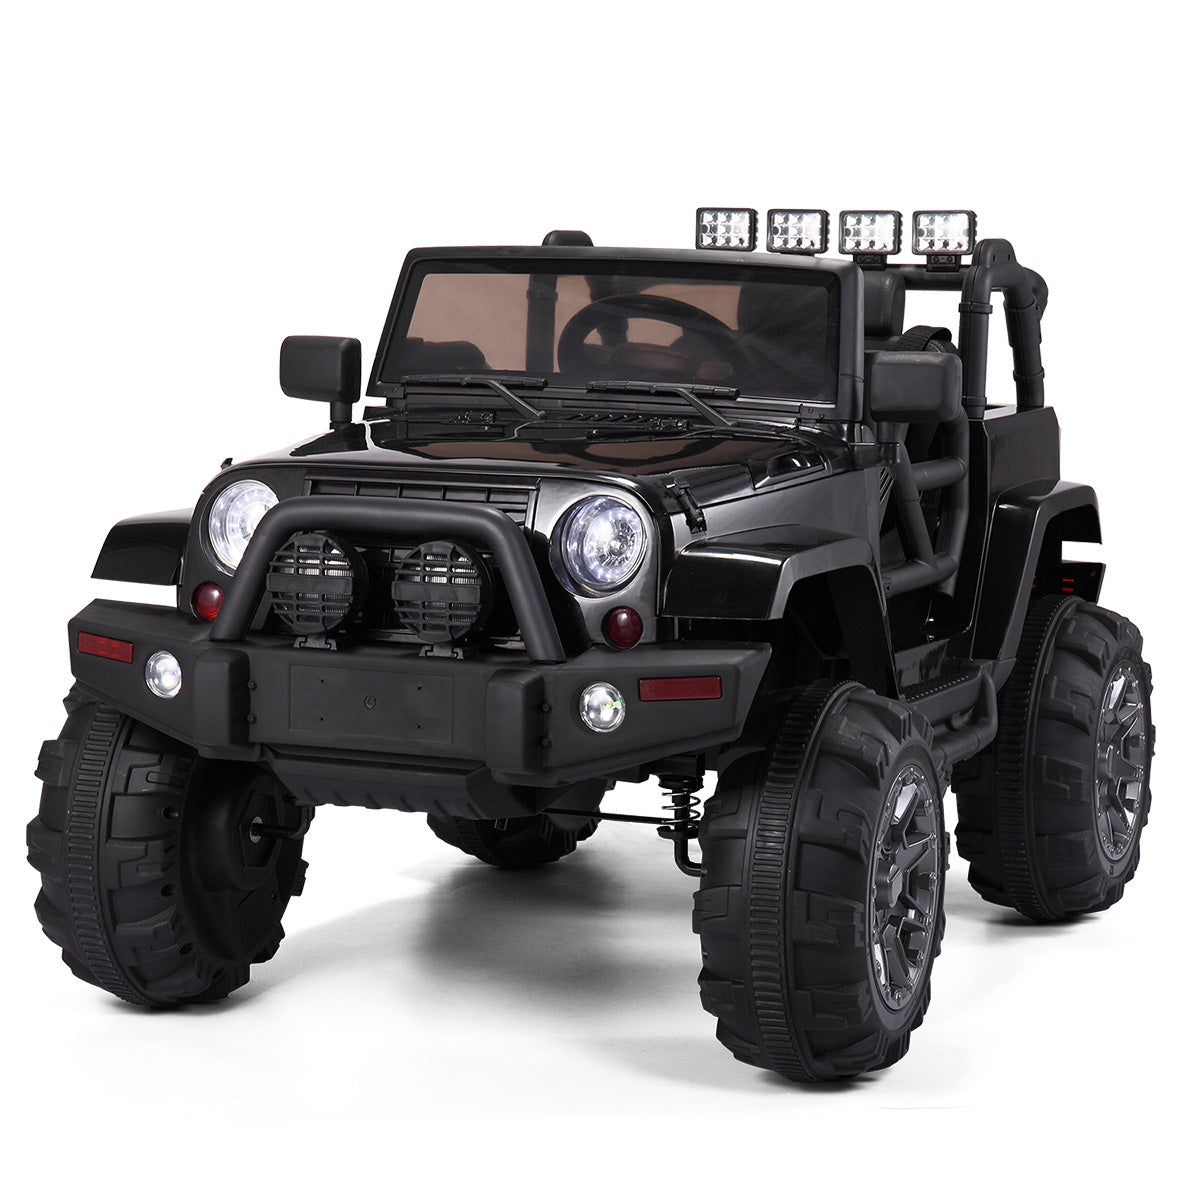 Ride on Cars with Remote Control, 12v Ride on Toys with LED Lights MP3 Player Car Toys, Battery Powered Riding Toys, Kids Party Gift, Black, LJ1146